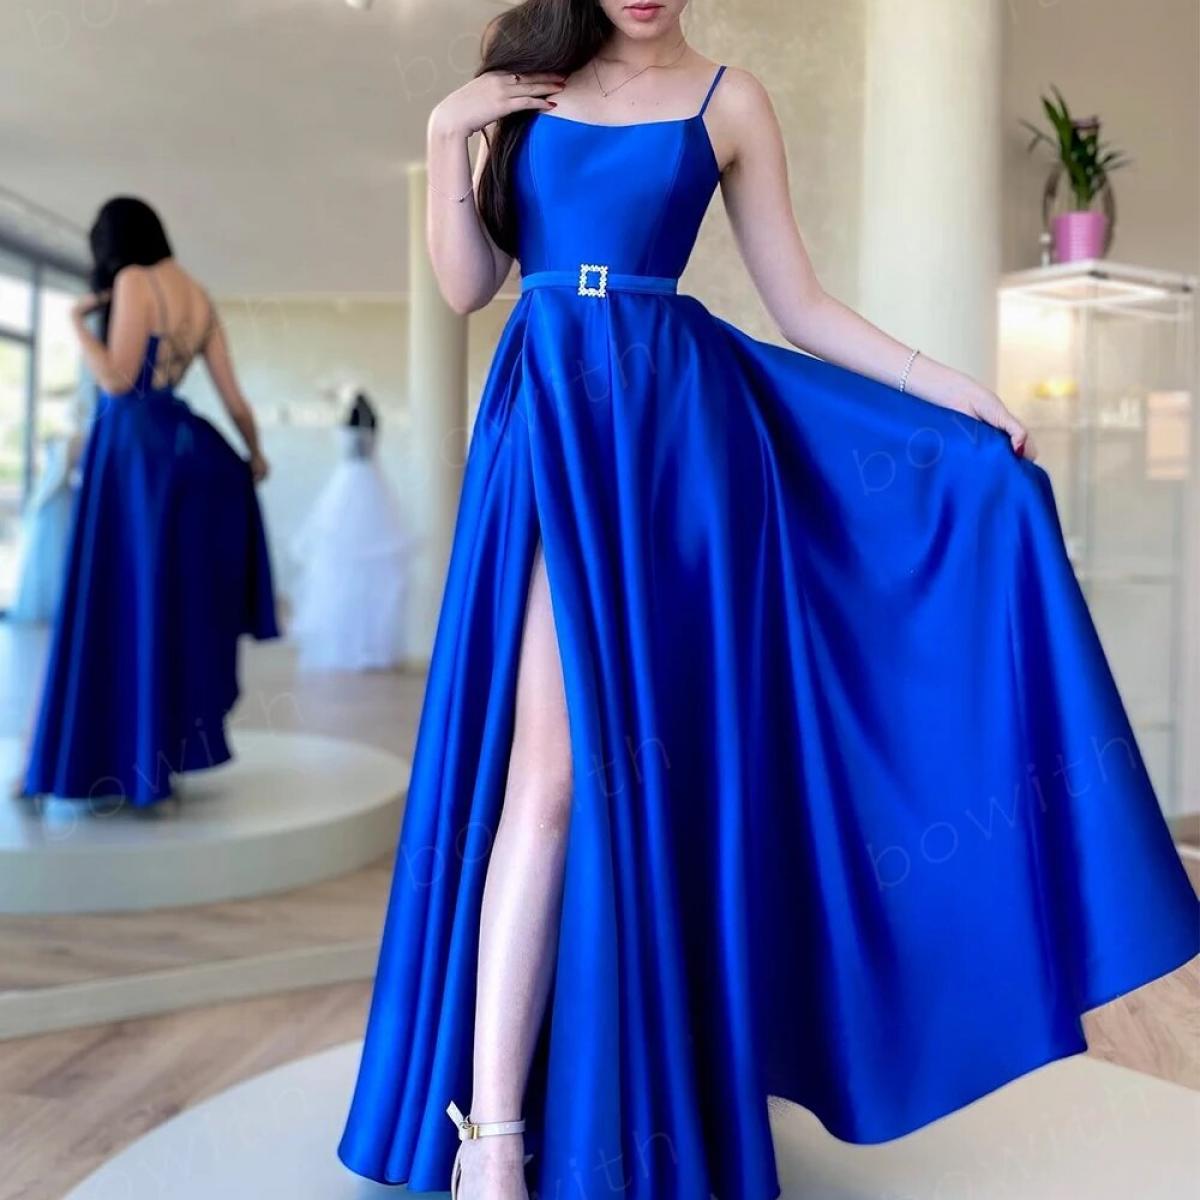 Bowith A Line Evening Dresses With Belt Lace Up Back Party Dresses For Women Formal Occasion Dresses Vestidos De Fiesta